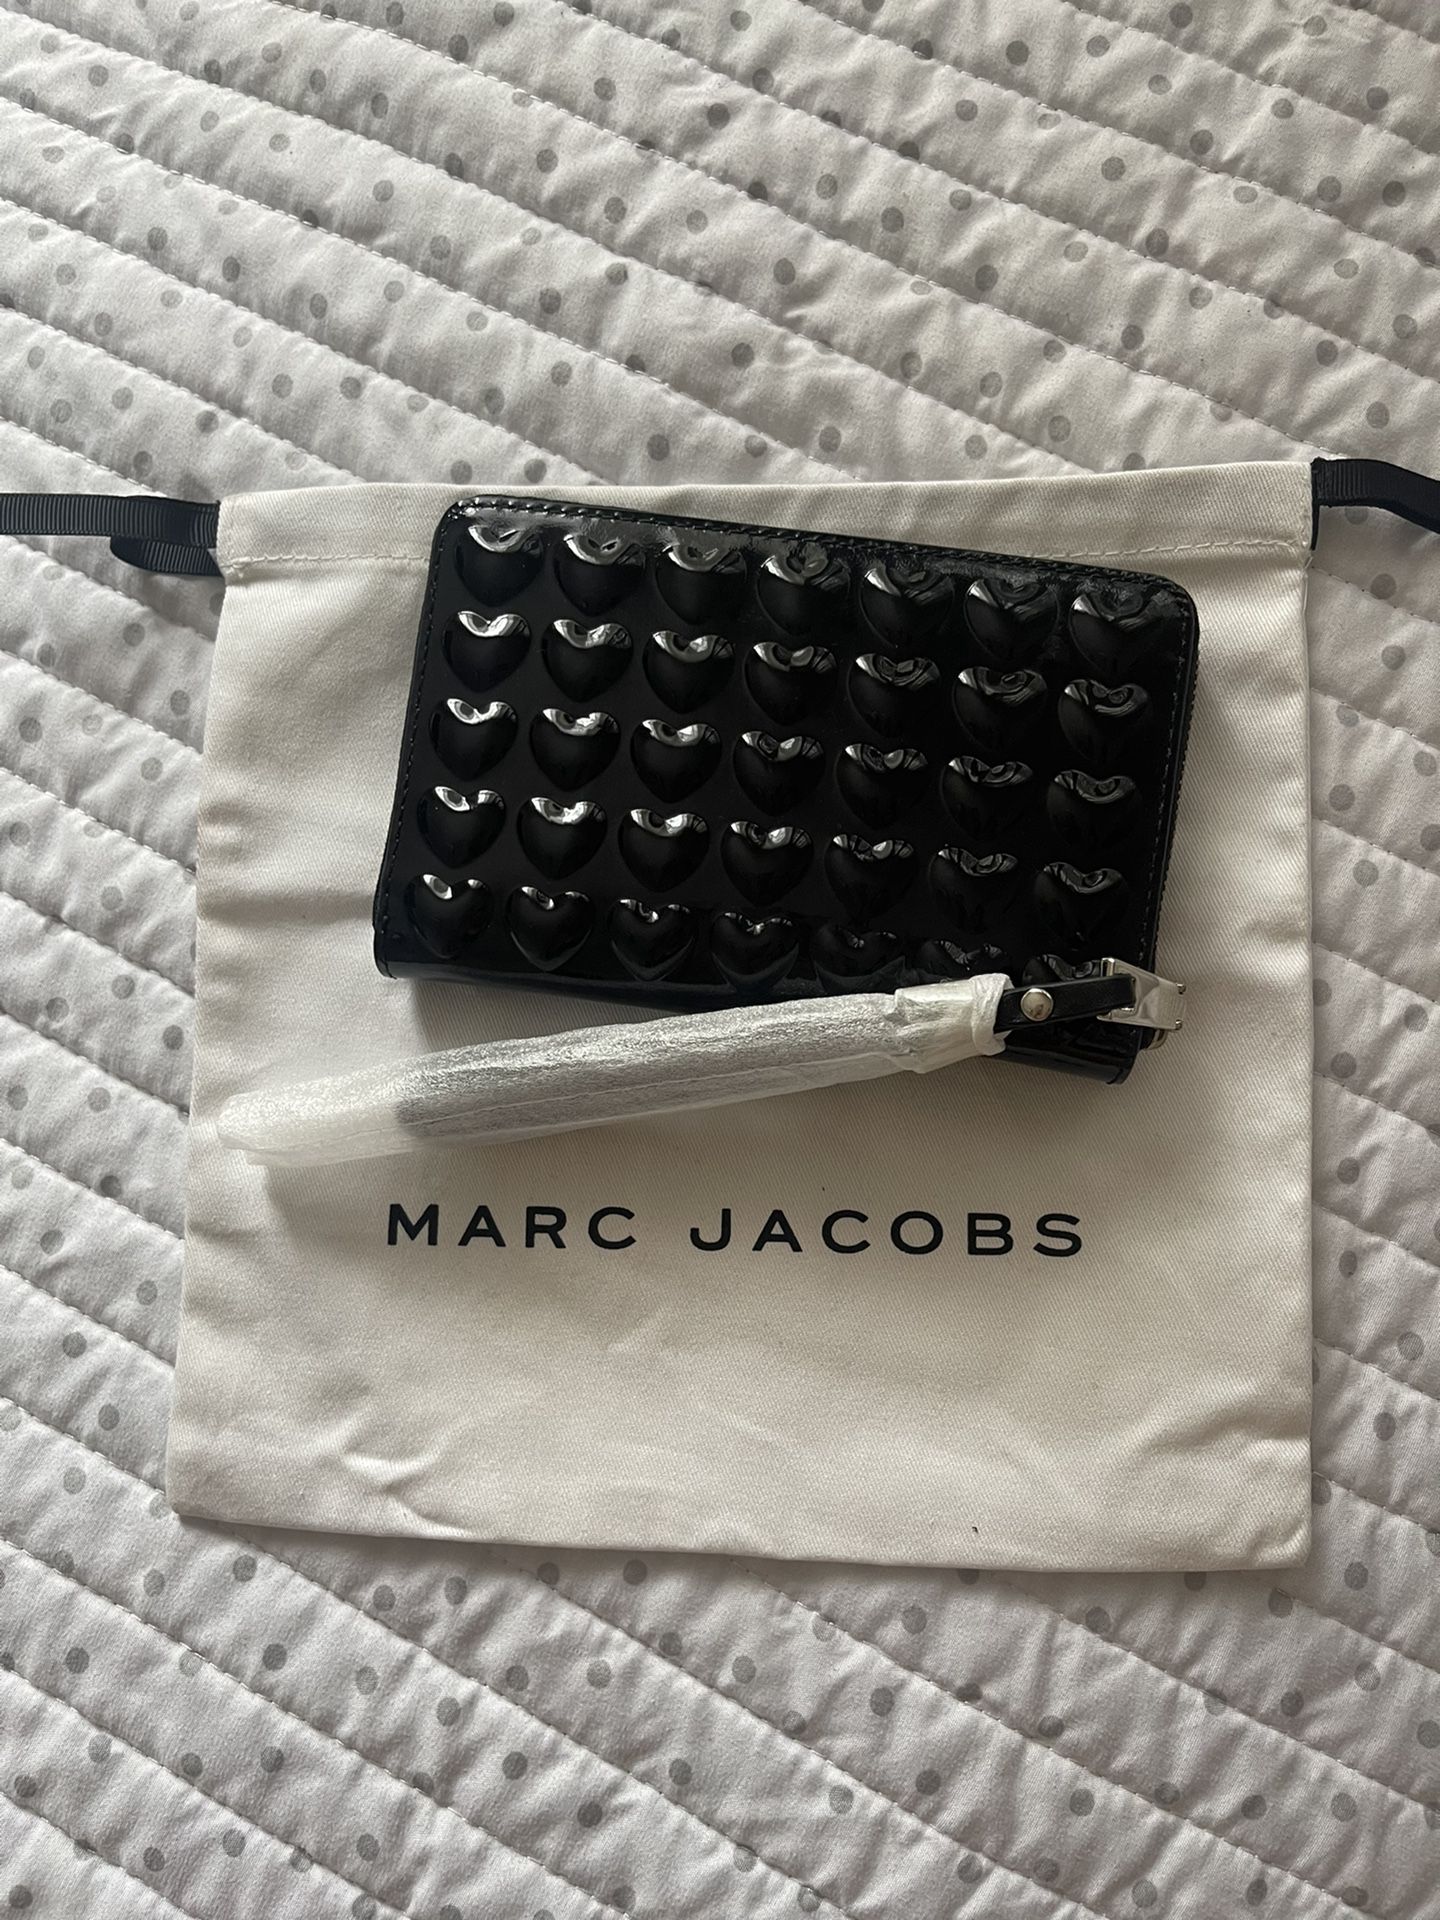 marc jacobs wallet new